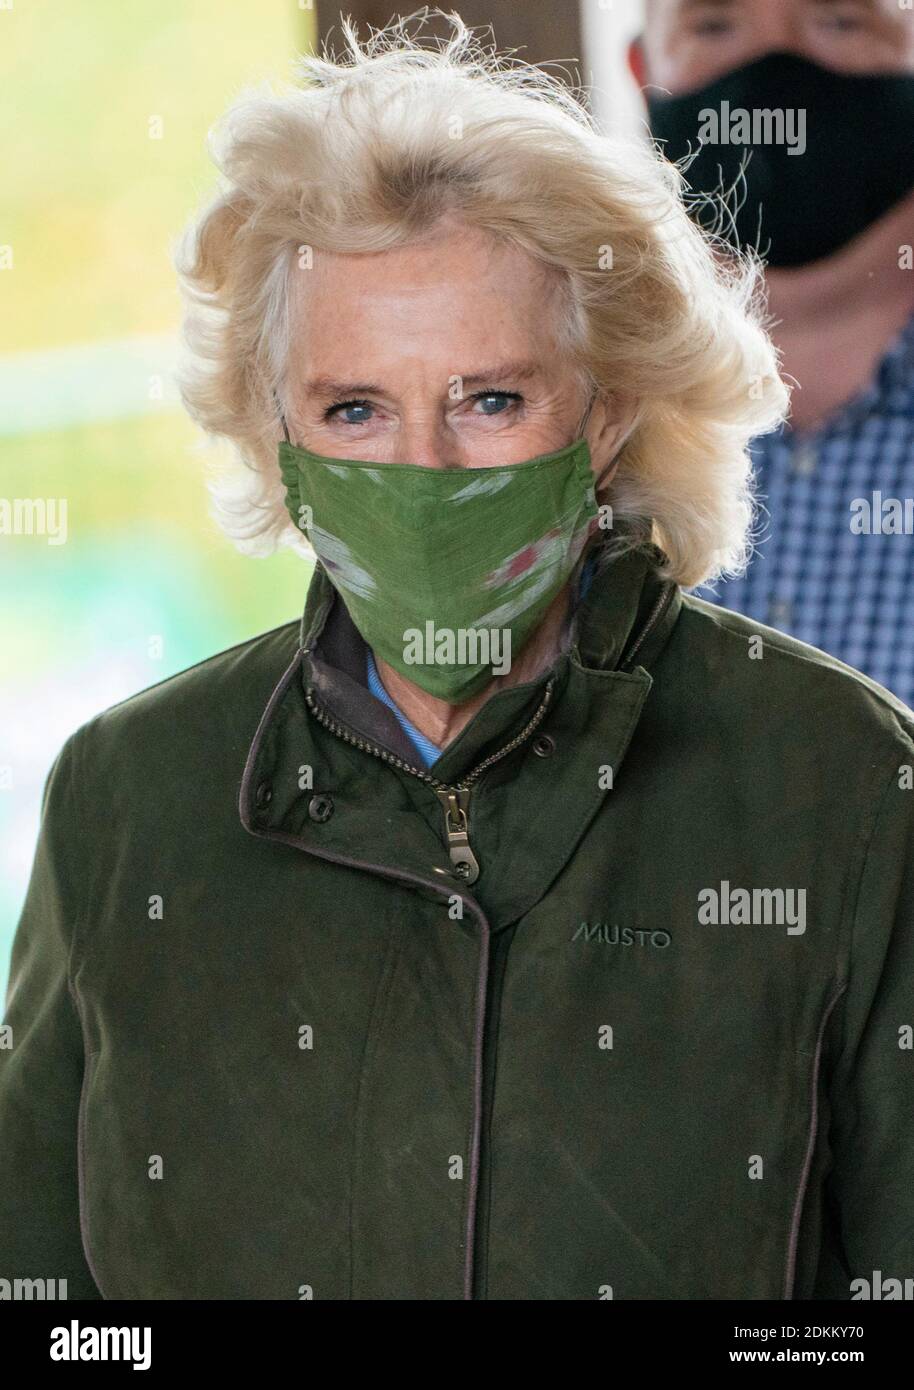 26th October 2020 - Camilla Duchess of Cornwall during a visit to Westonbirt, The National Arboretum in Tetbury, Gloucestershire. The Arboretum attracts over 550,000 visitors a year providing a beautiful landscape that people can visit to enjoy and learn about trees, as well as a vital resource for scientists to research more about these plants and understand how to protect them for the future. Photo Credit: ALPR/AdMedia /MediaPunch ***FOR USA ONLY*** Stock Photo